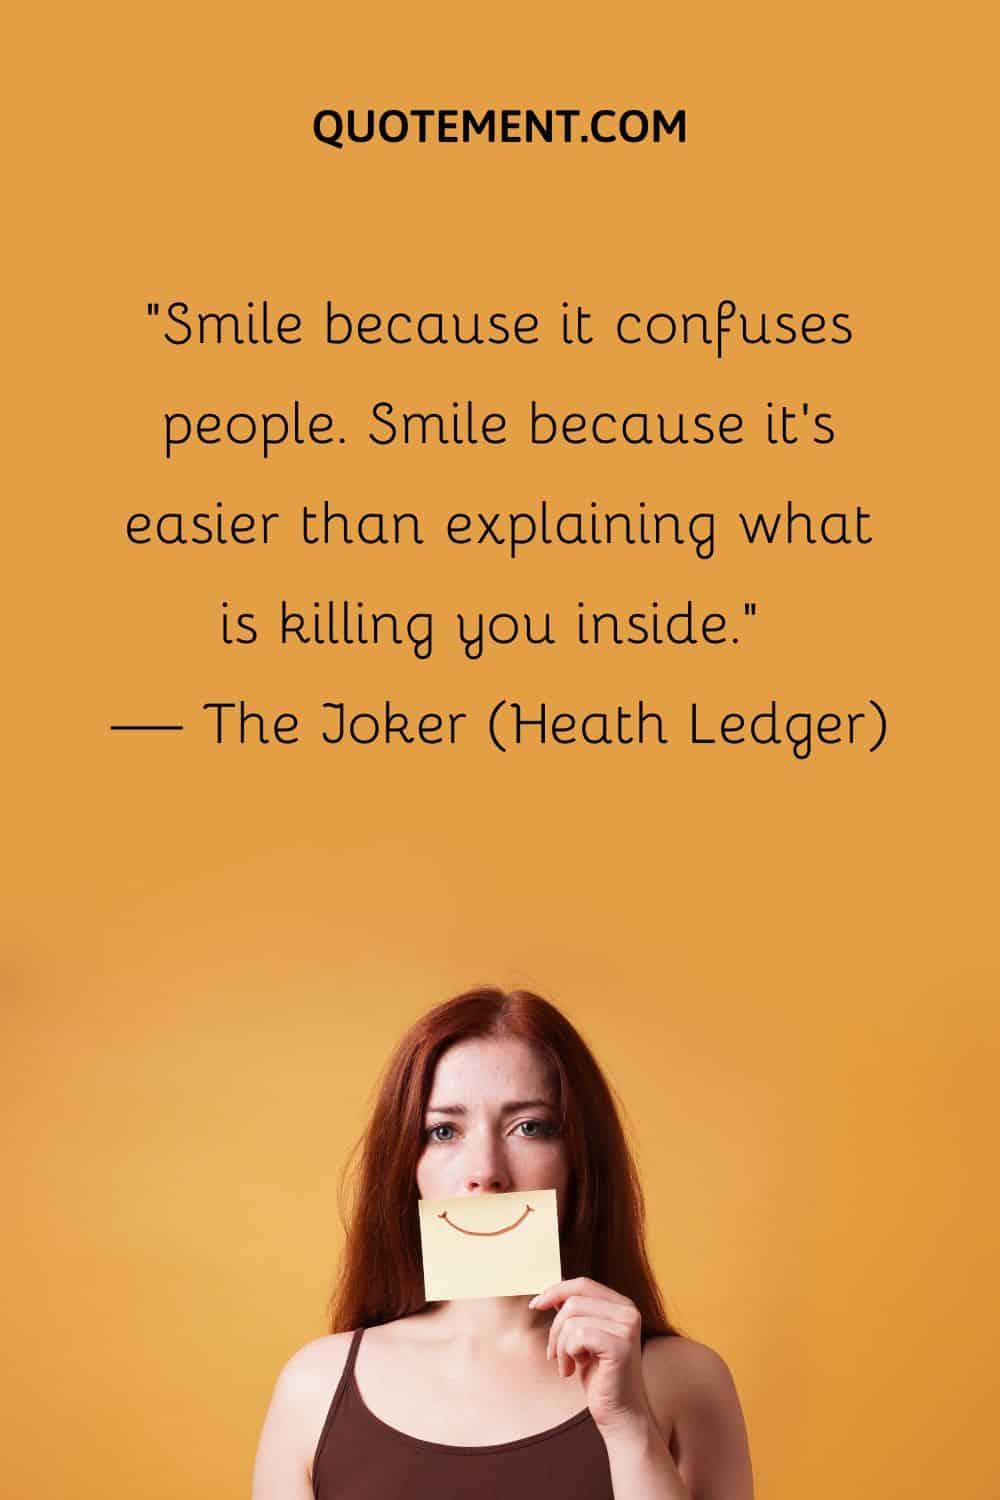 Smile because it confuses people